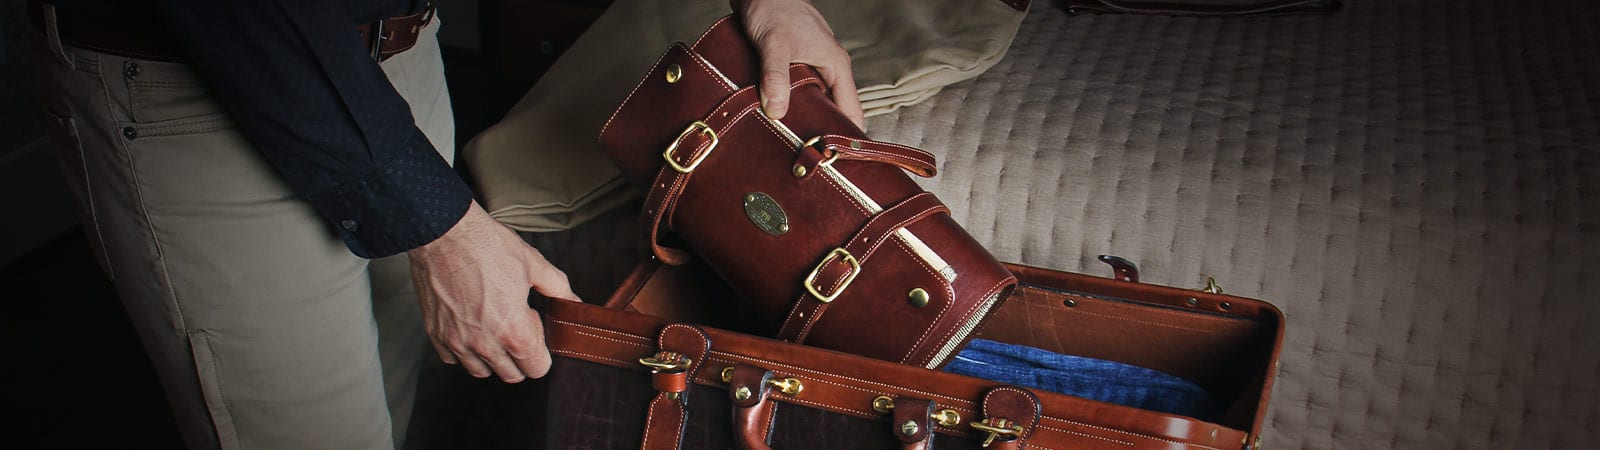 Shave and Dopp Kits Category Header - Man putting Vintage Brown leather No. 2 Shave Kit into a No. 2 Grip travel bag